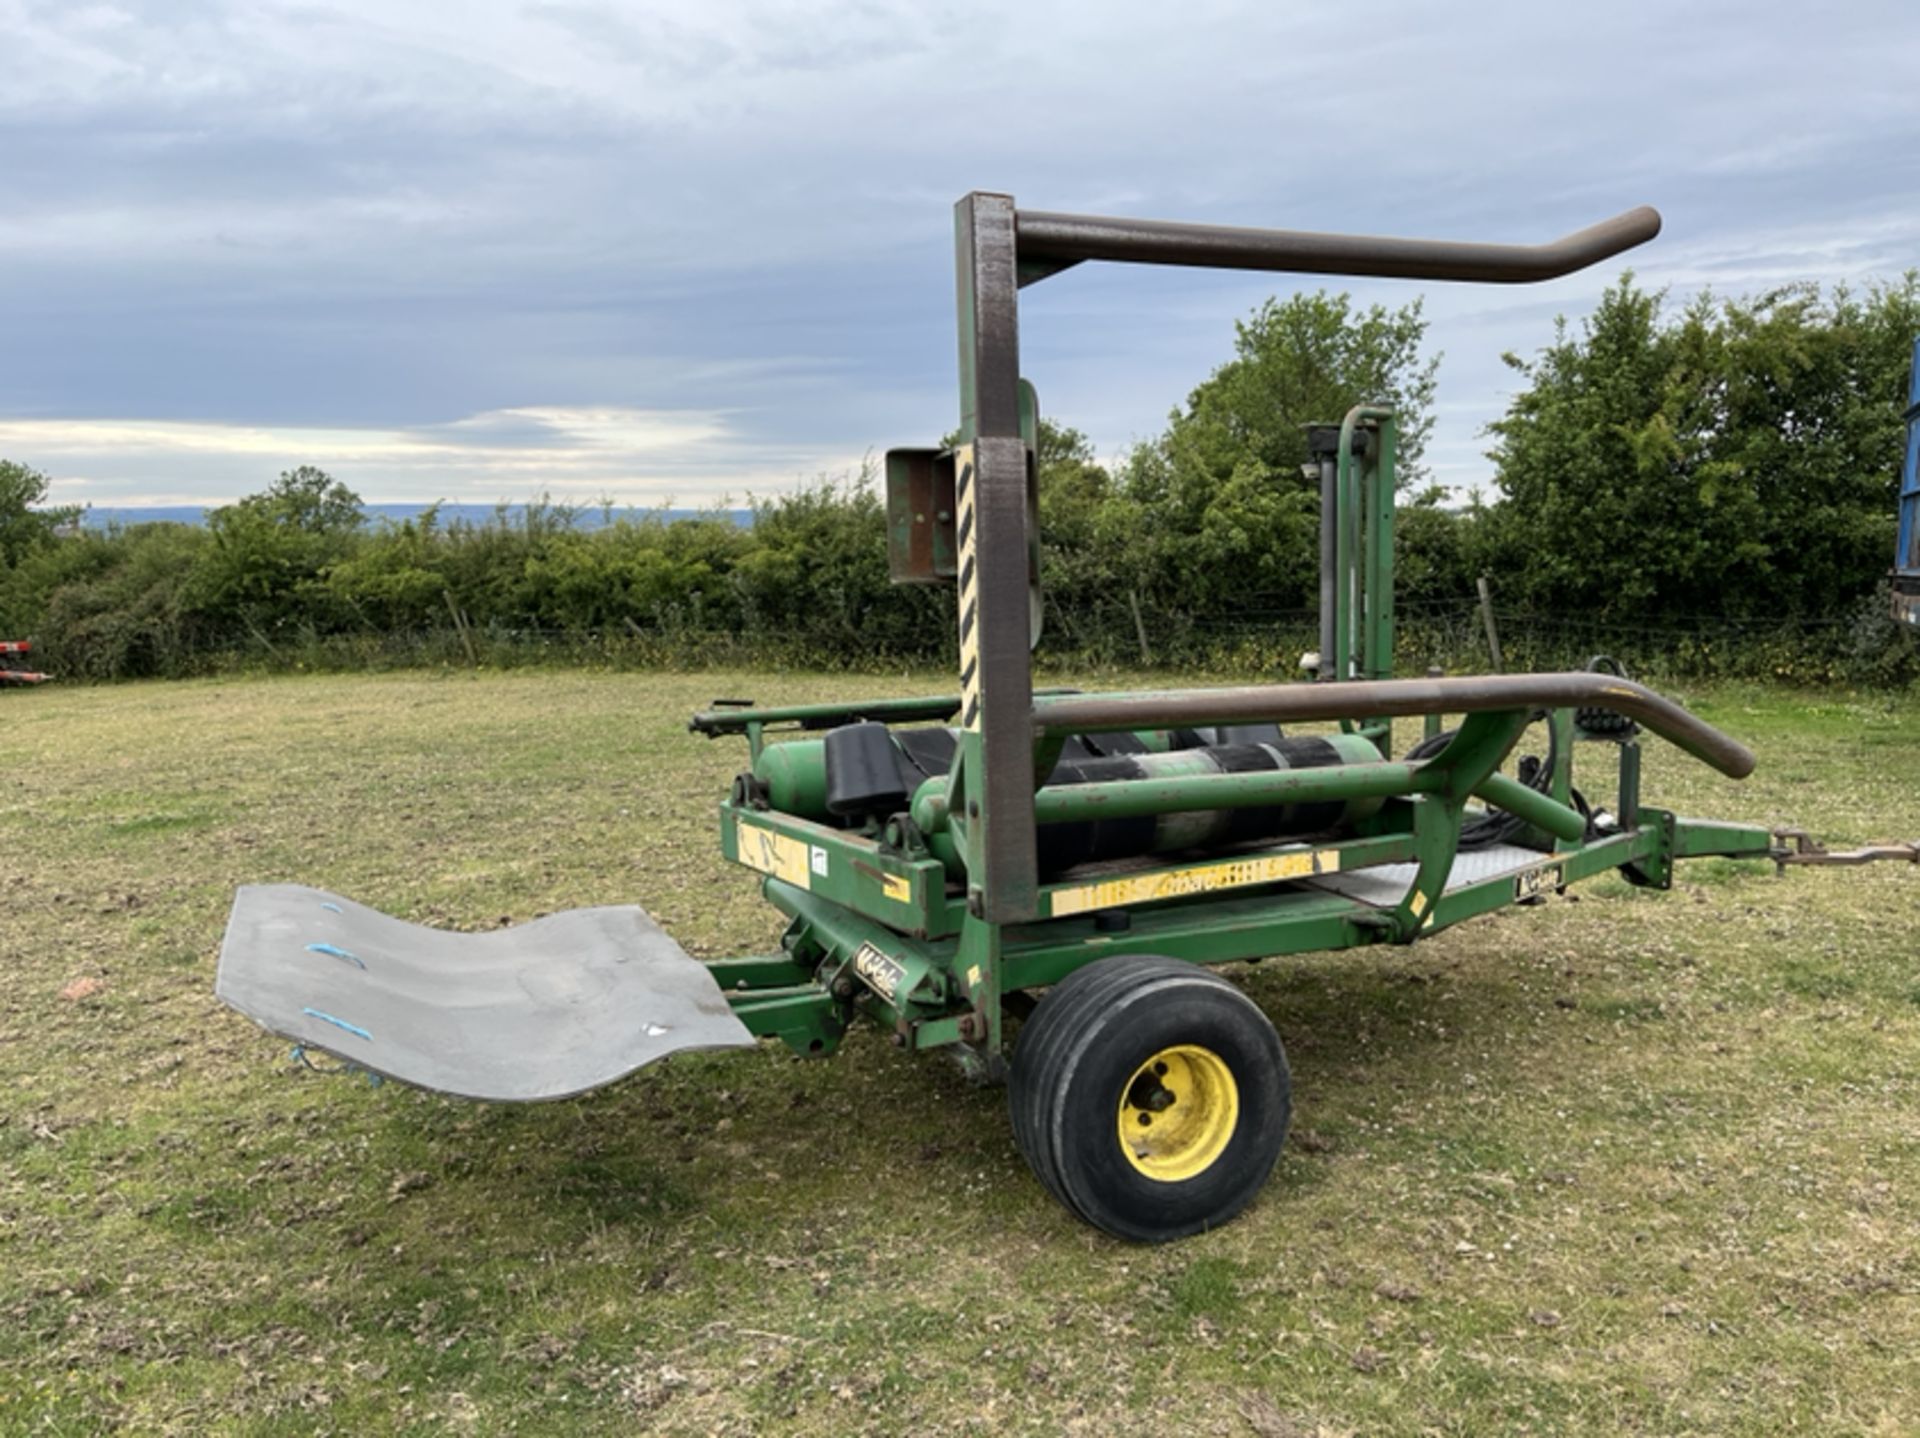 MCHALE 991b 750ml SELF LOAD BALE WRAPPER - C/W MANUAL CONTROLS AND COUNTER *PLUS VAT* - Image 2 of 5